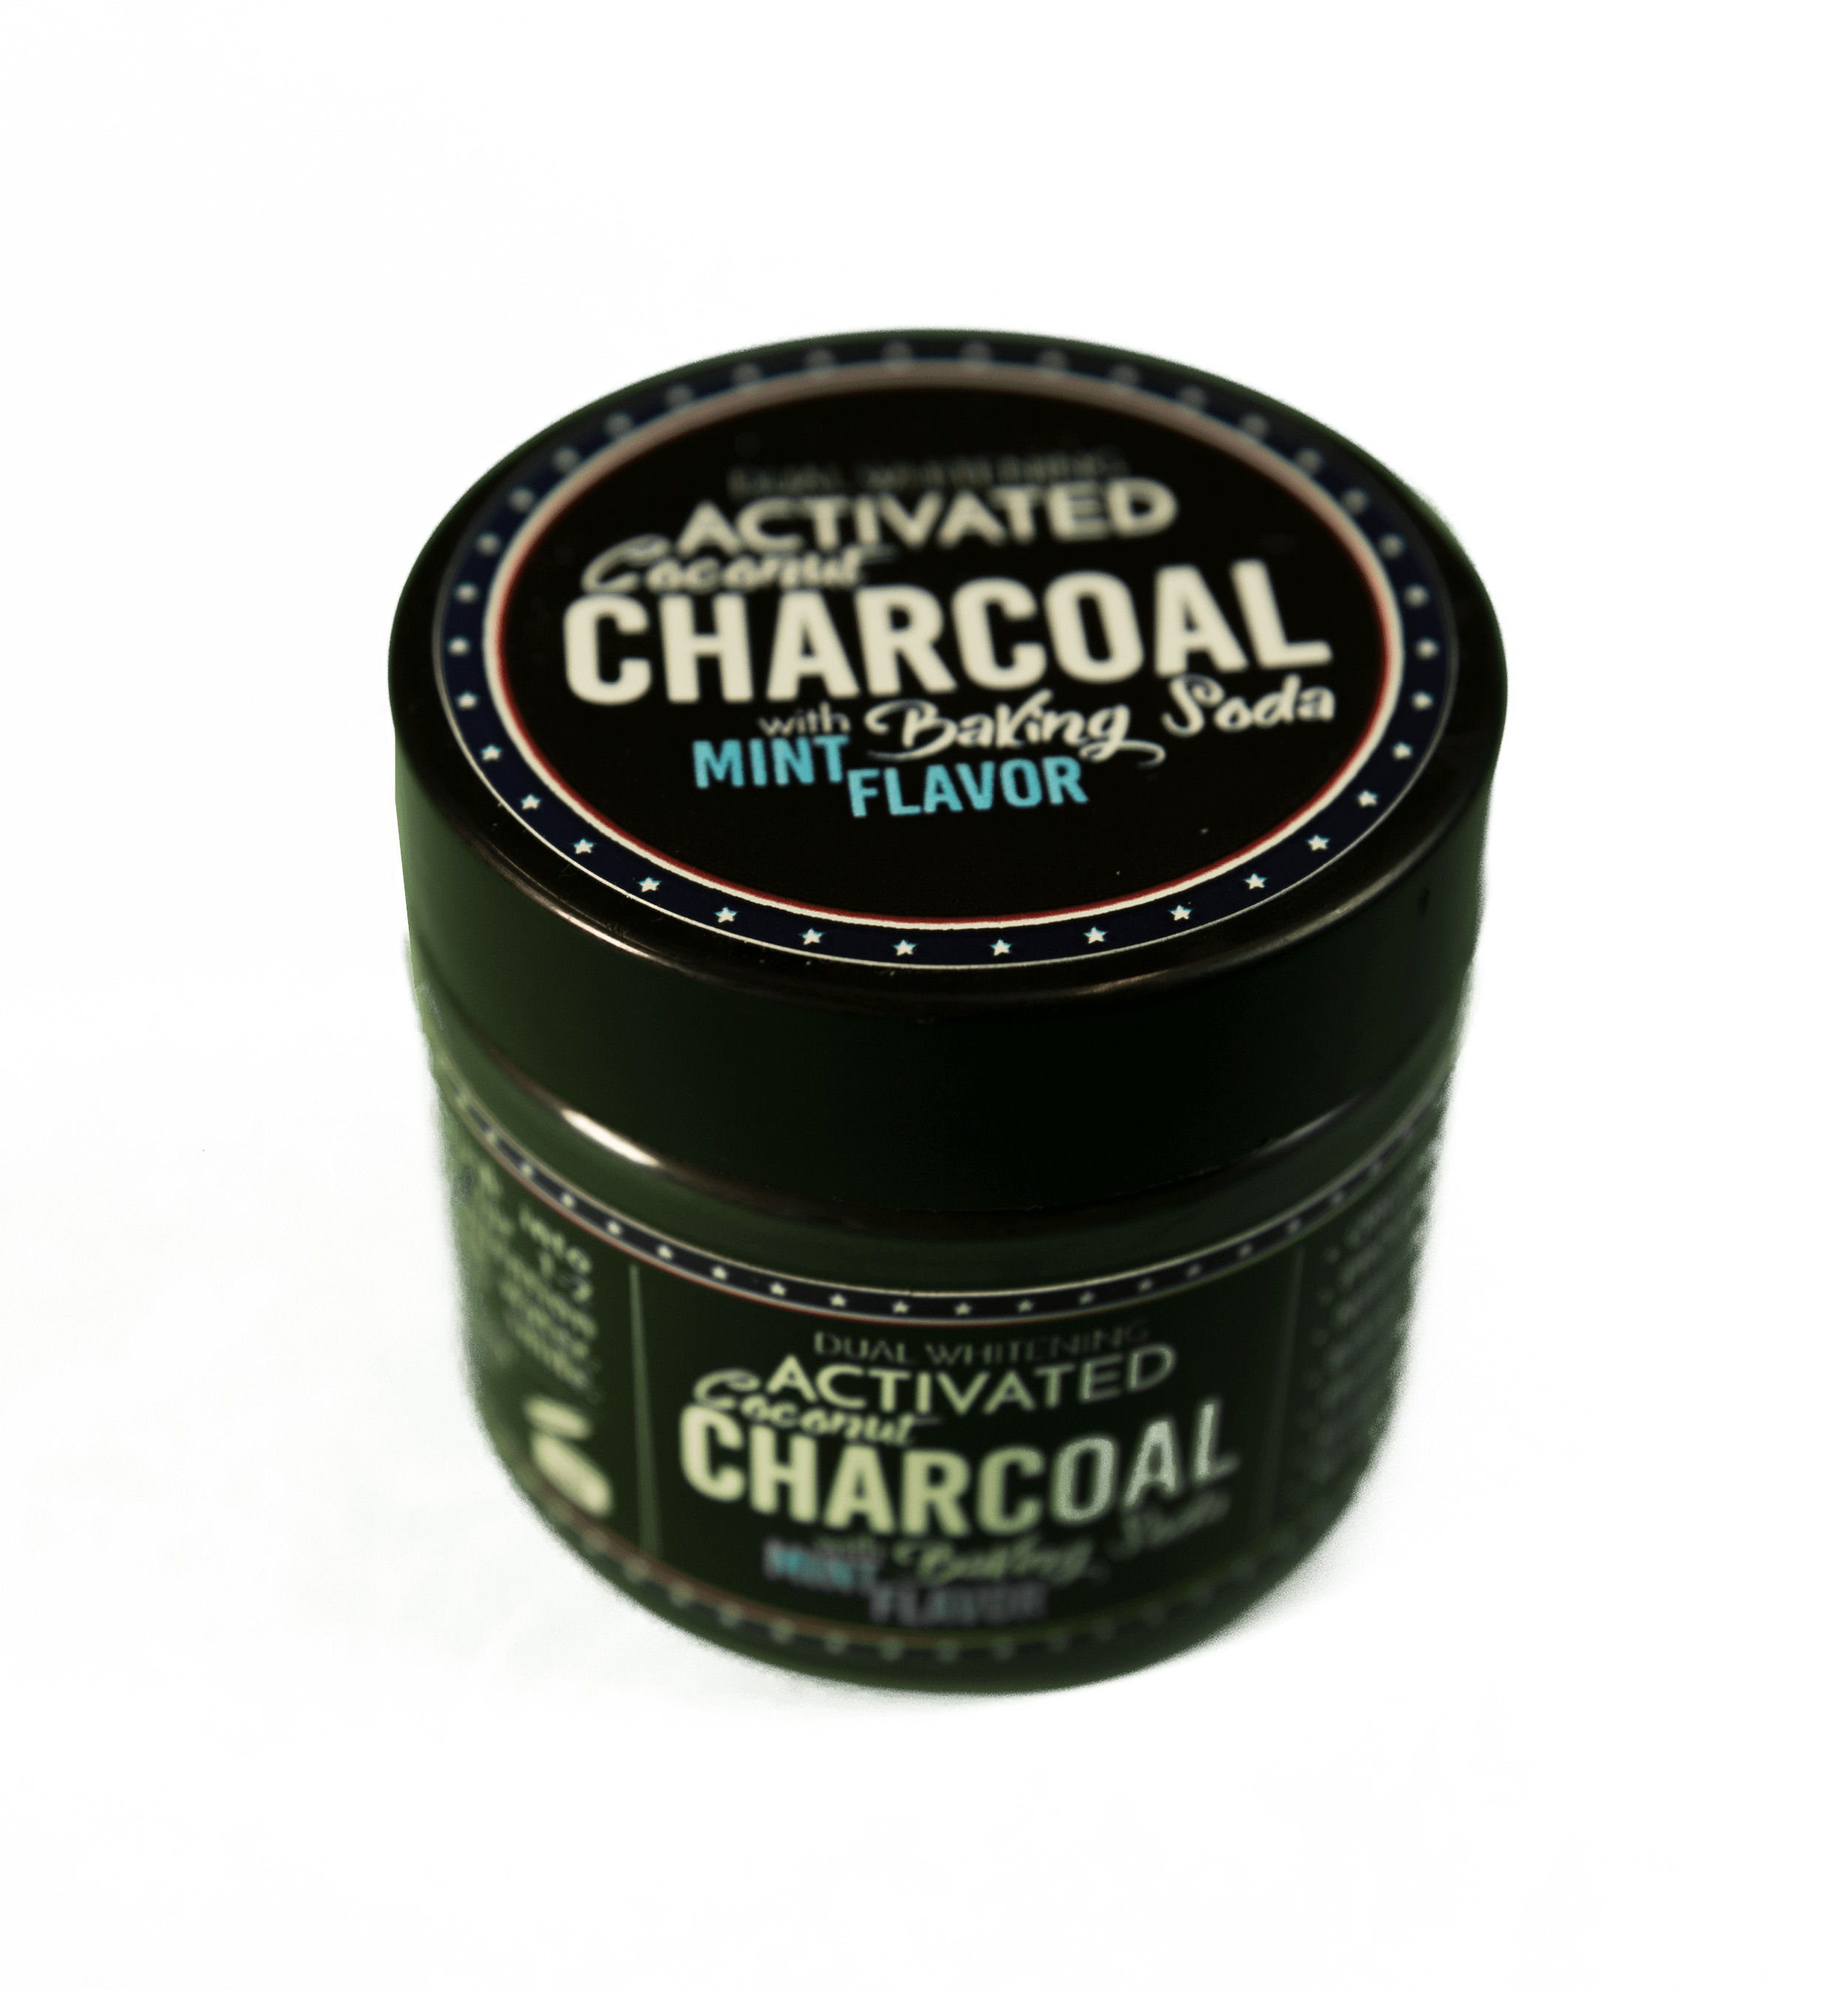 Charcoal Teeth Whitening Powder Mint Flavor icons